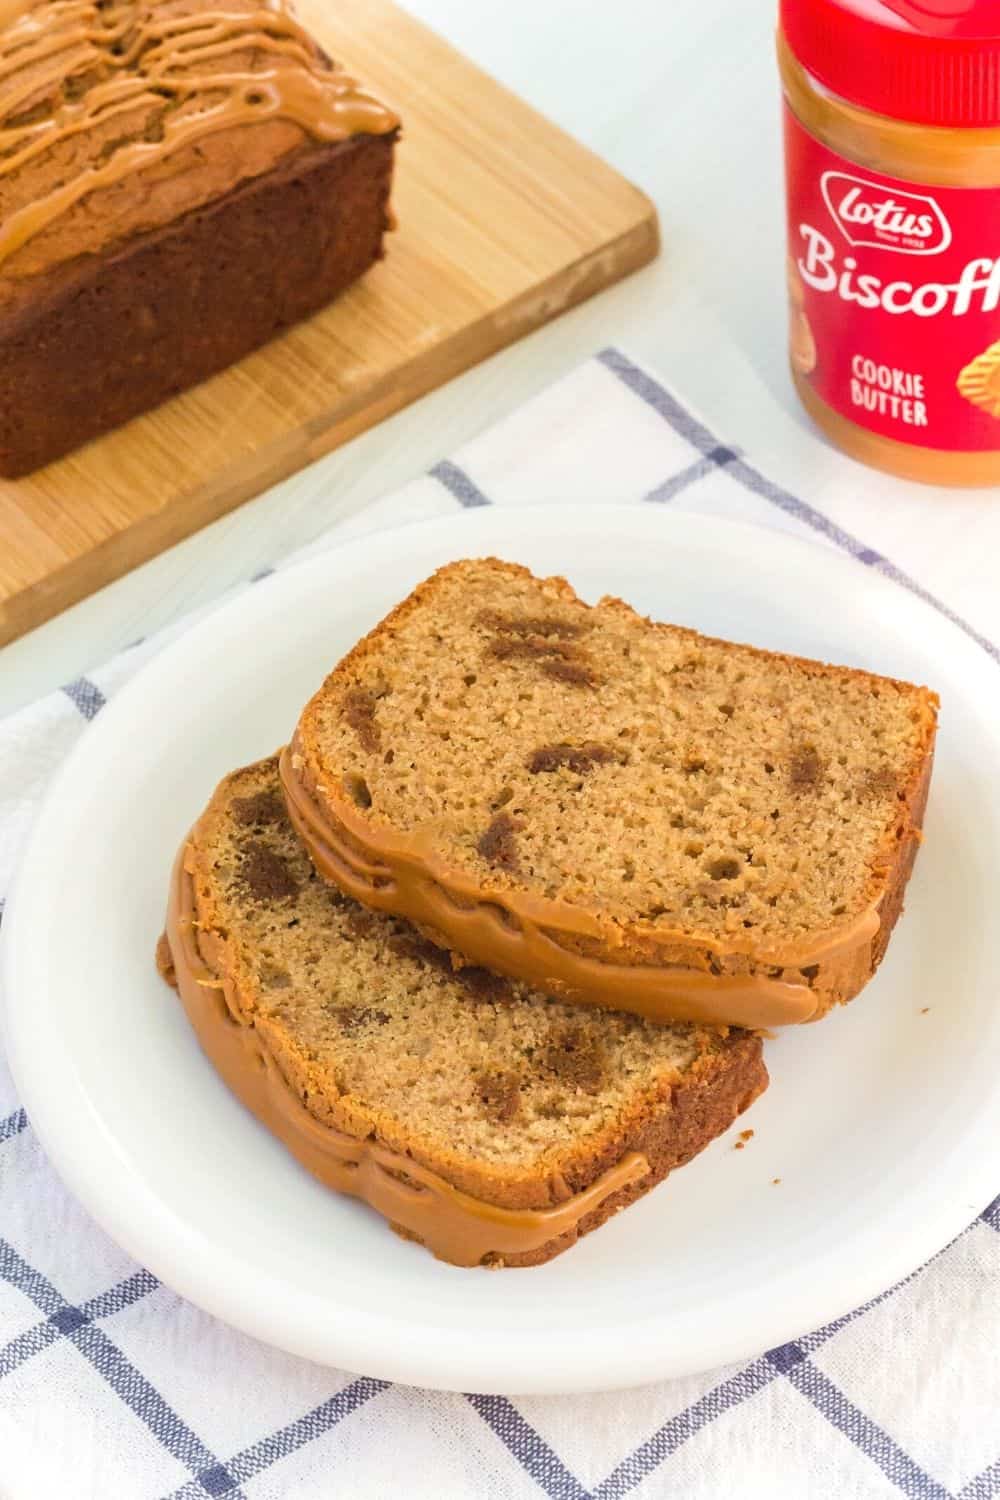 two slices of Biscoff loaf cake served on a white plate, with the remaining cake and a jar of Biscoff spread in the background.